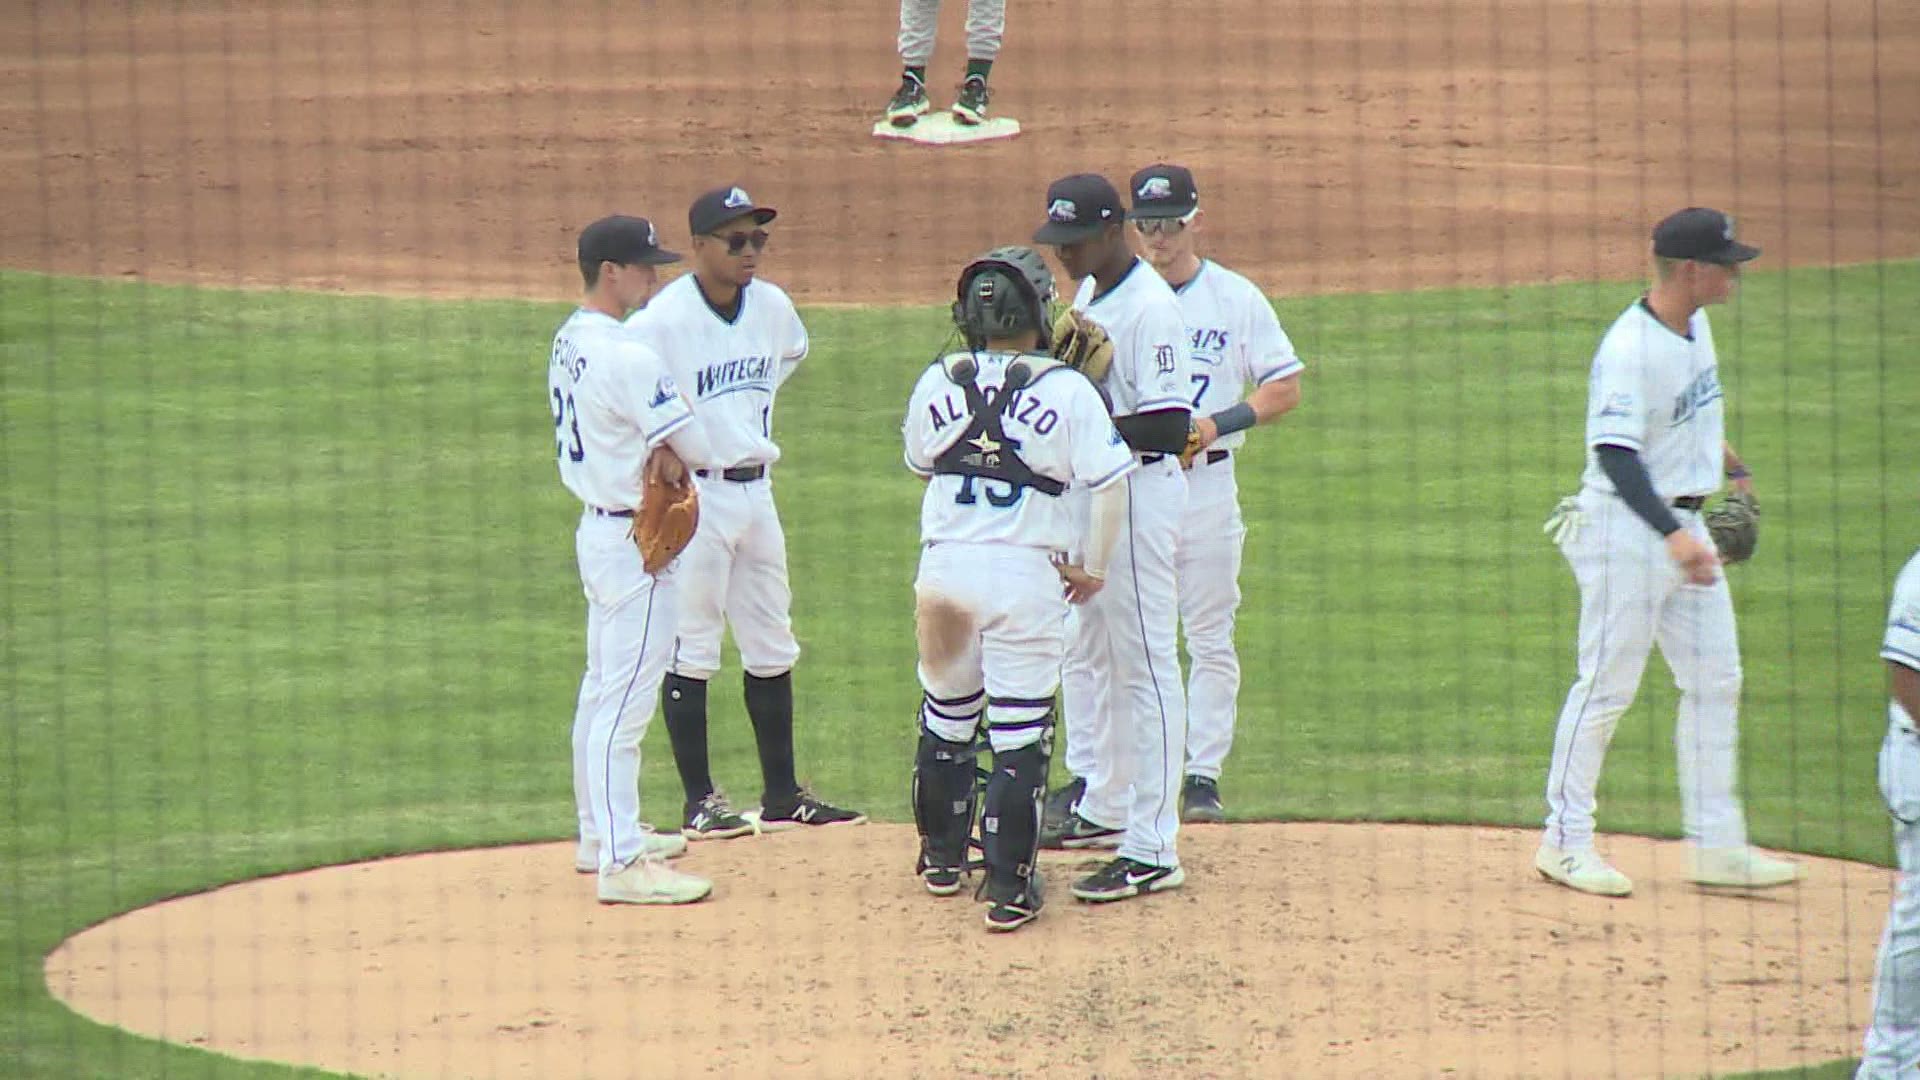 The Whitecaps had major errors that led to their 4-7 loss to the Great Lakes Loons.